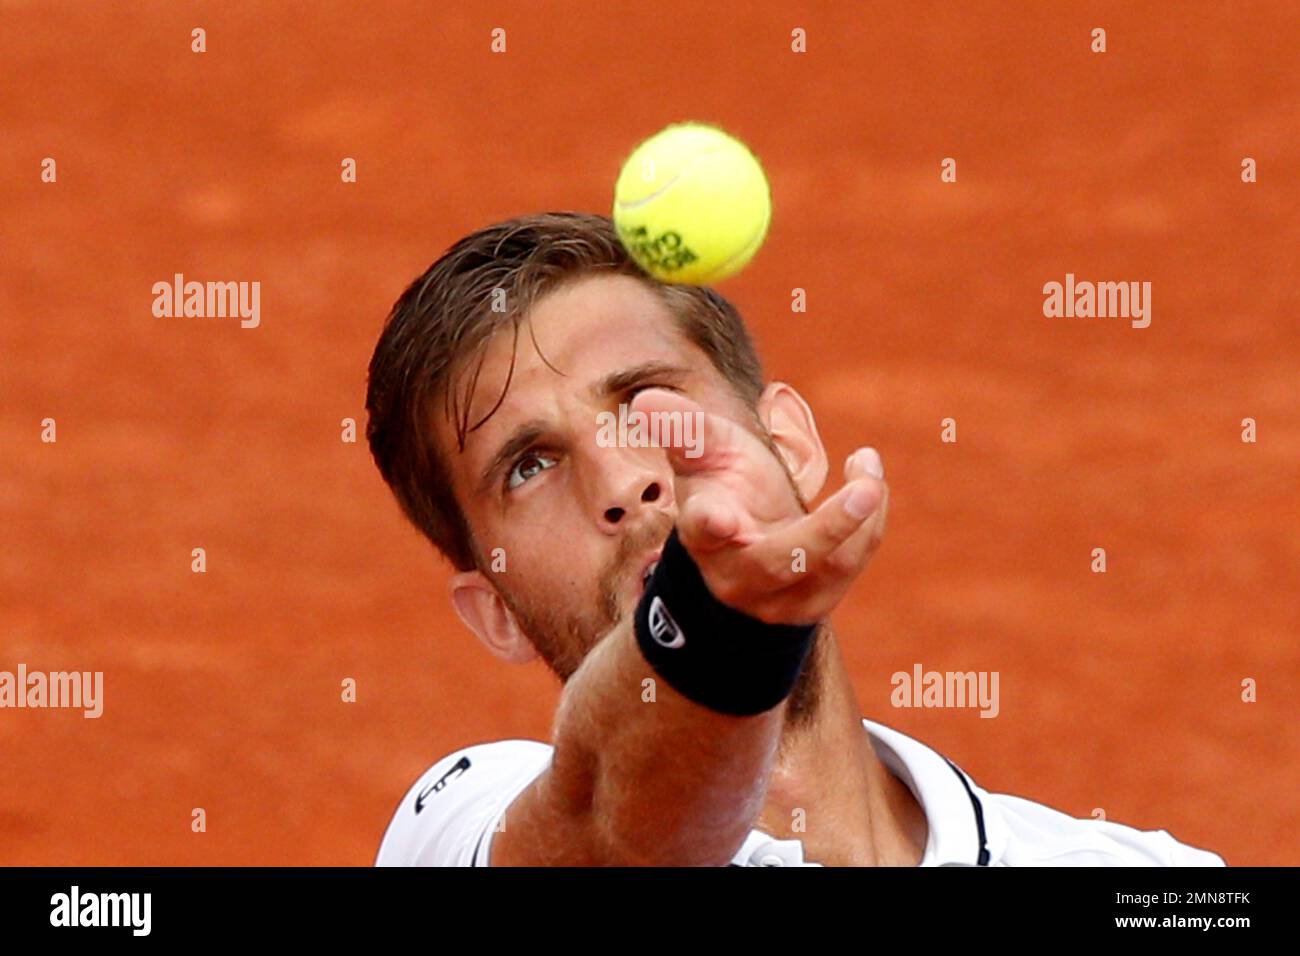 Slovakia's Martin Klizan serves against France's Gael Monfils during their  second round match of the French Open tennis tournament at the Roland  Garros stadium in Paris, France, Wednesday, May 30, 2018. (AP